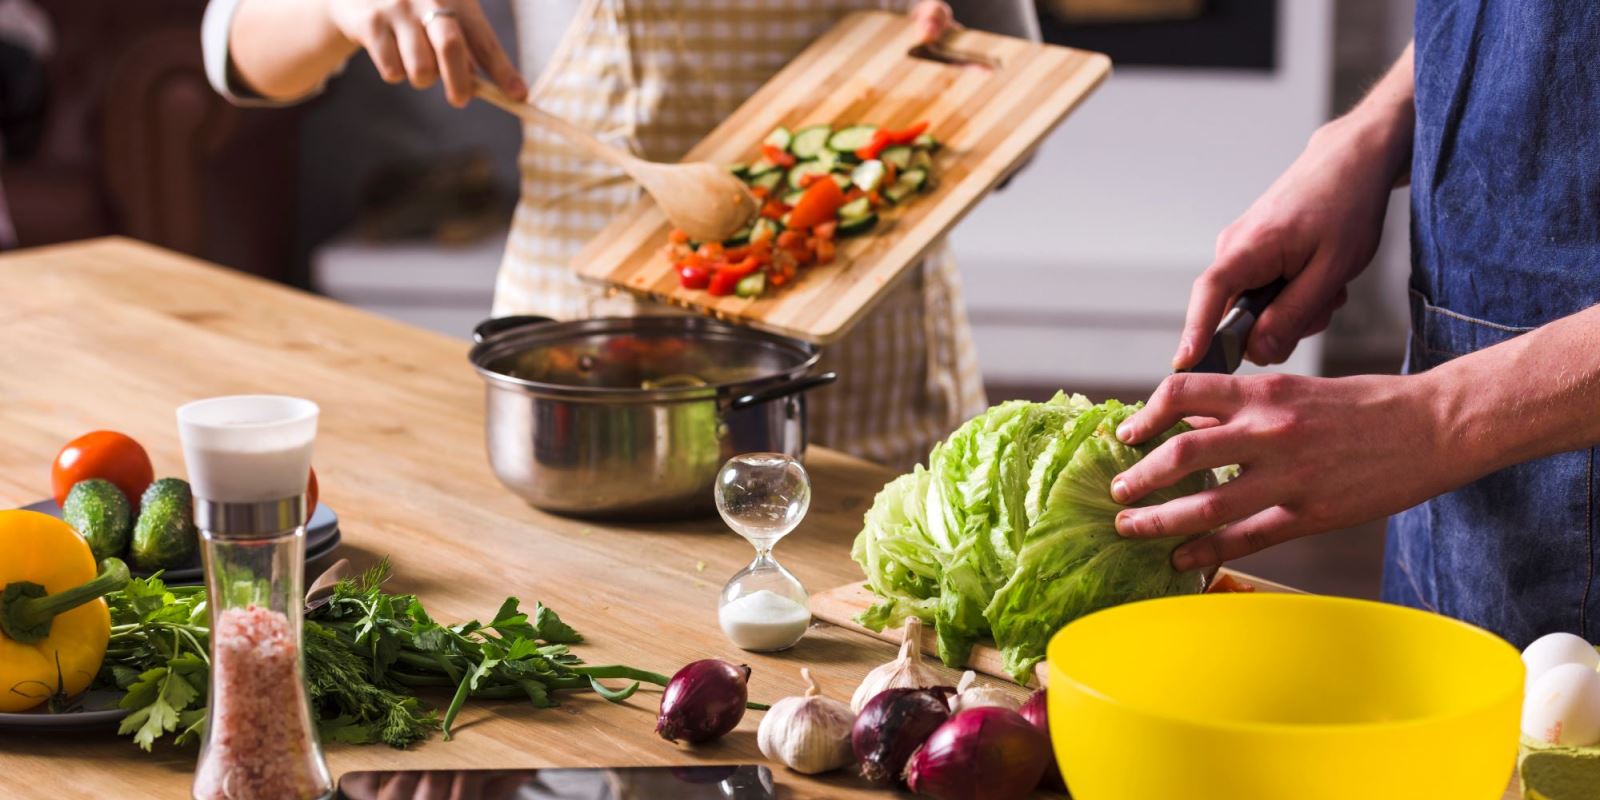 Managing Food Safety in the Hospitality Industry (HACCP)